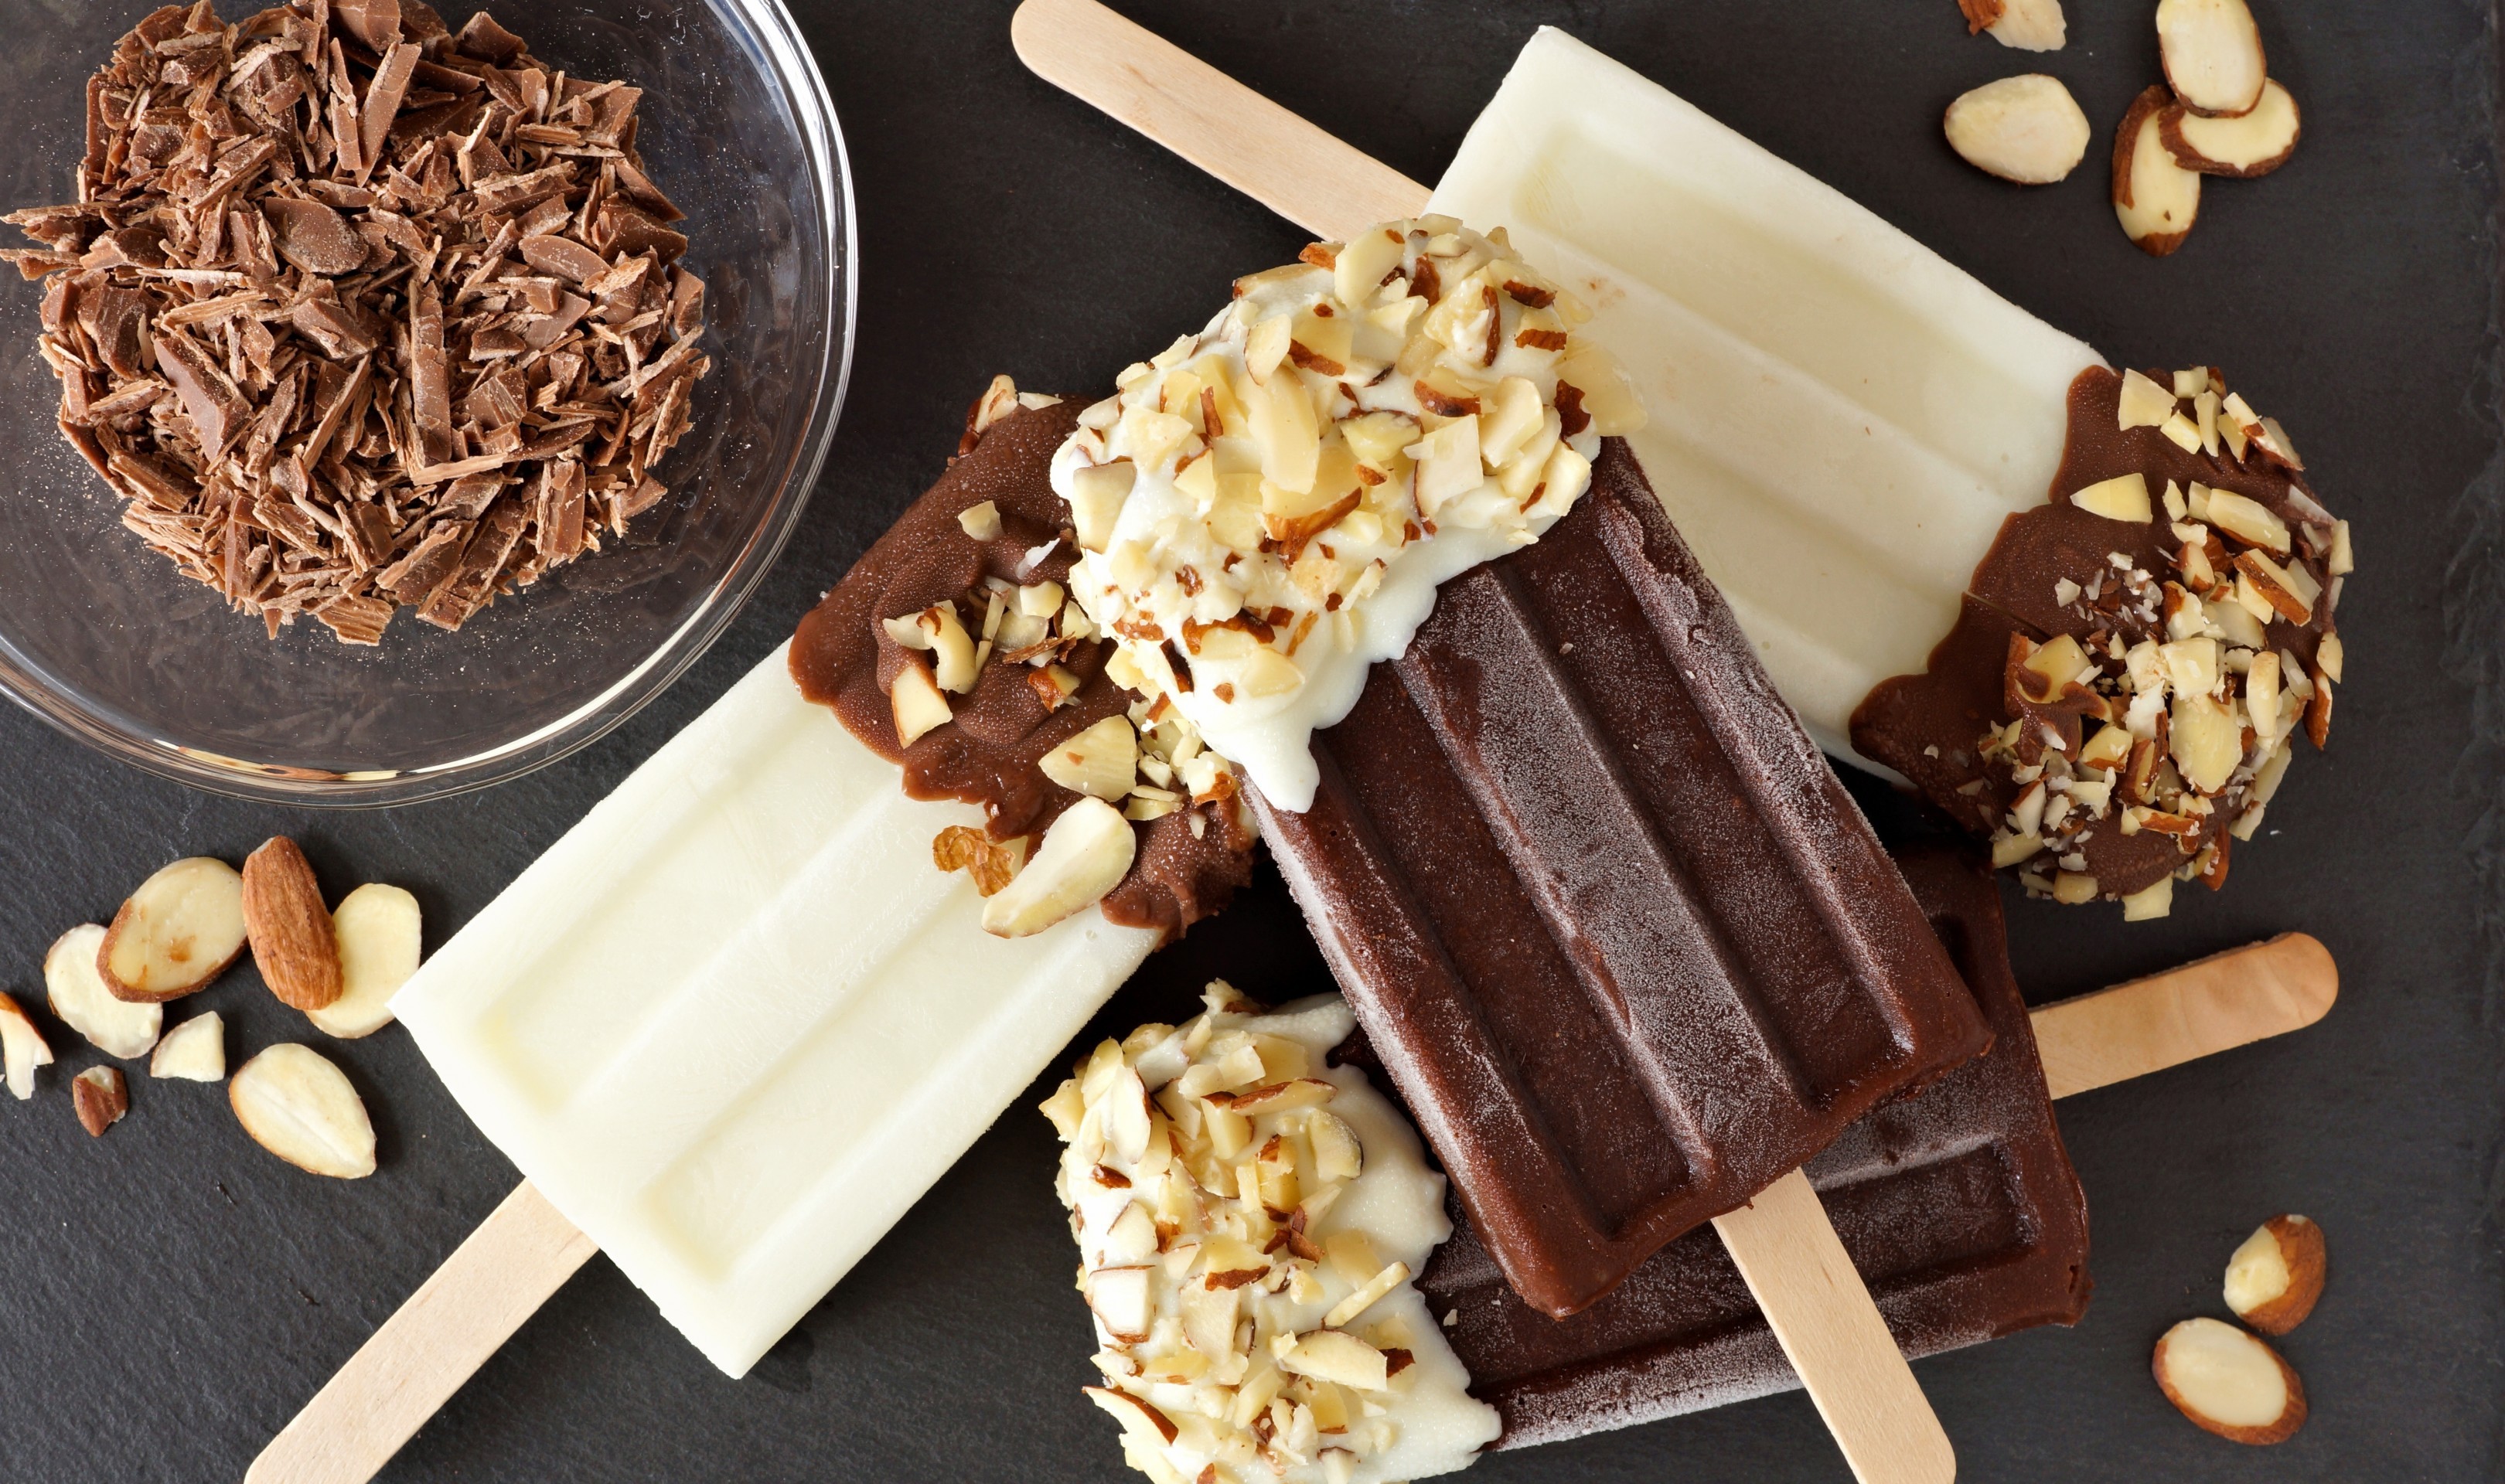 Chocolate Popsicle Ice Cream, Nuts, Snack - Chocolate , HD Wallpaper & Backgrounds